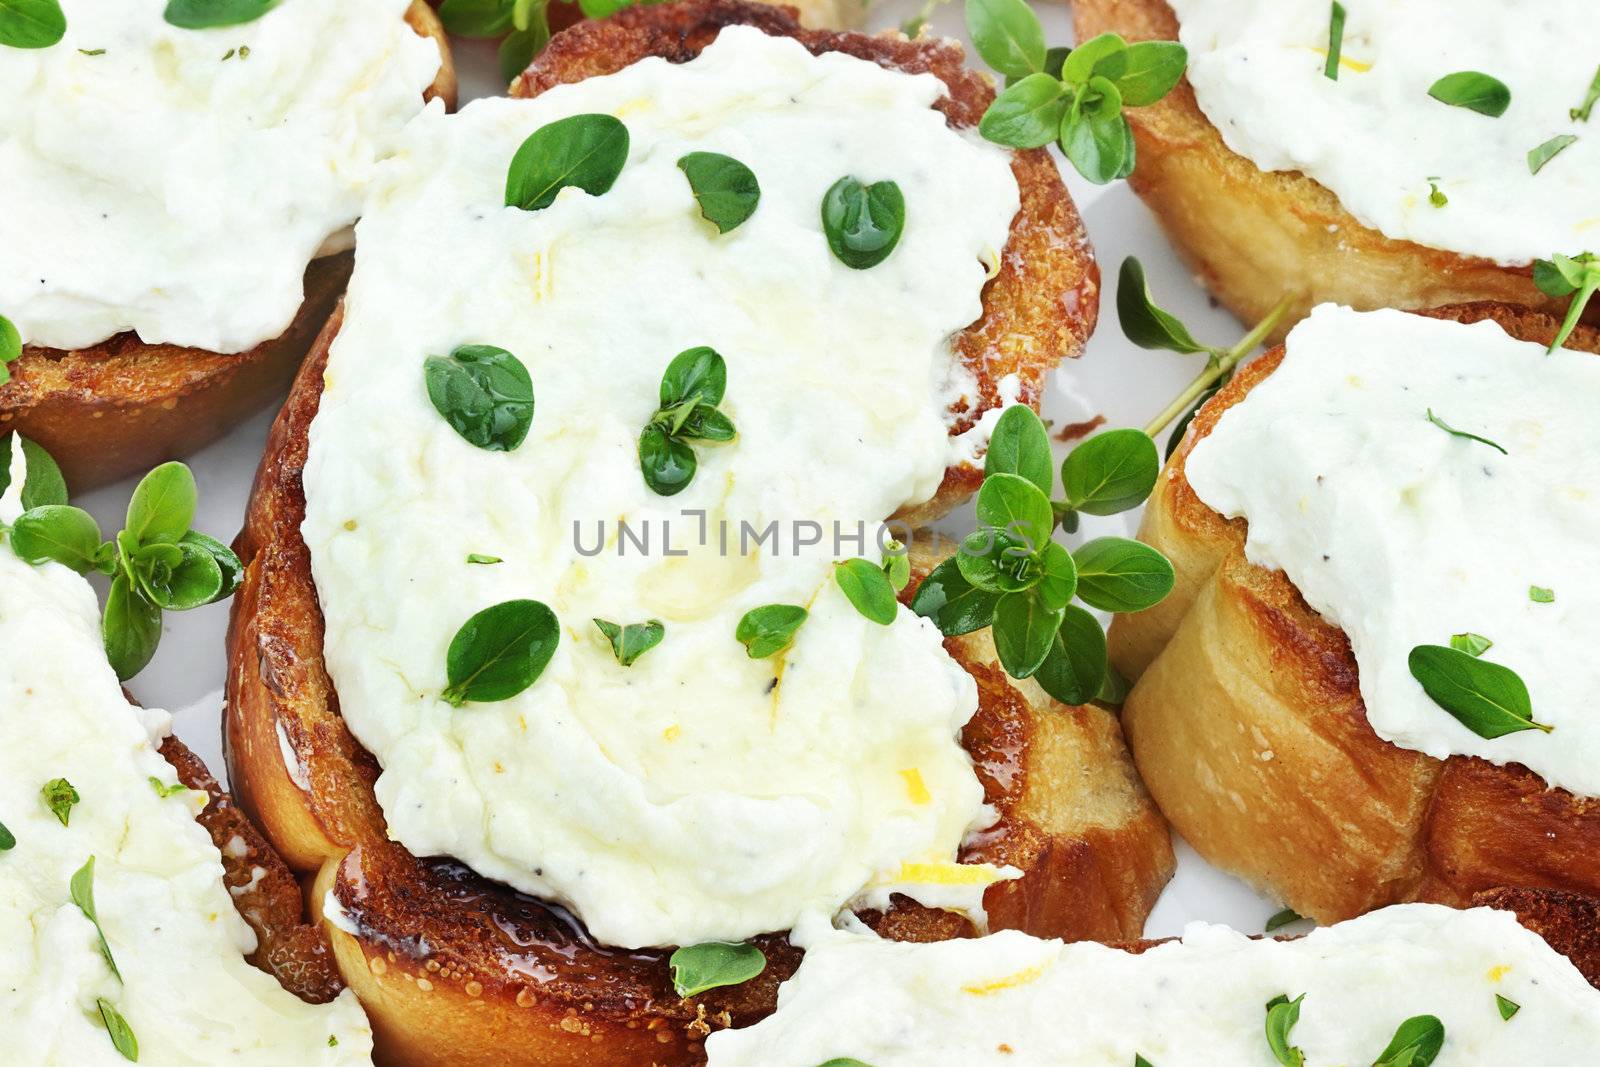 Bruschetta with ricotta cheese, lemon zest and thyme, drizzled with golden honey. Selective focus on center Bruschetta and some blur on lower portion of image.
